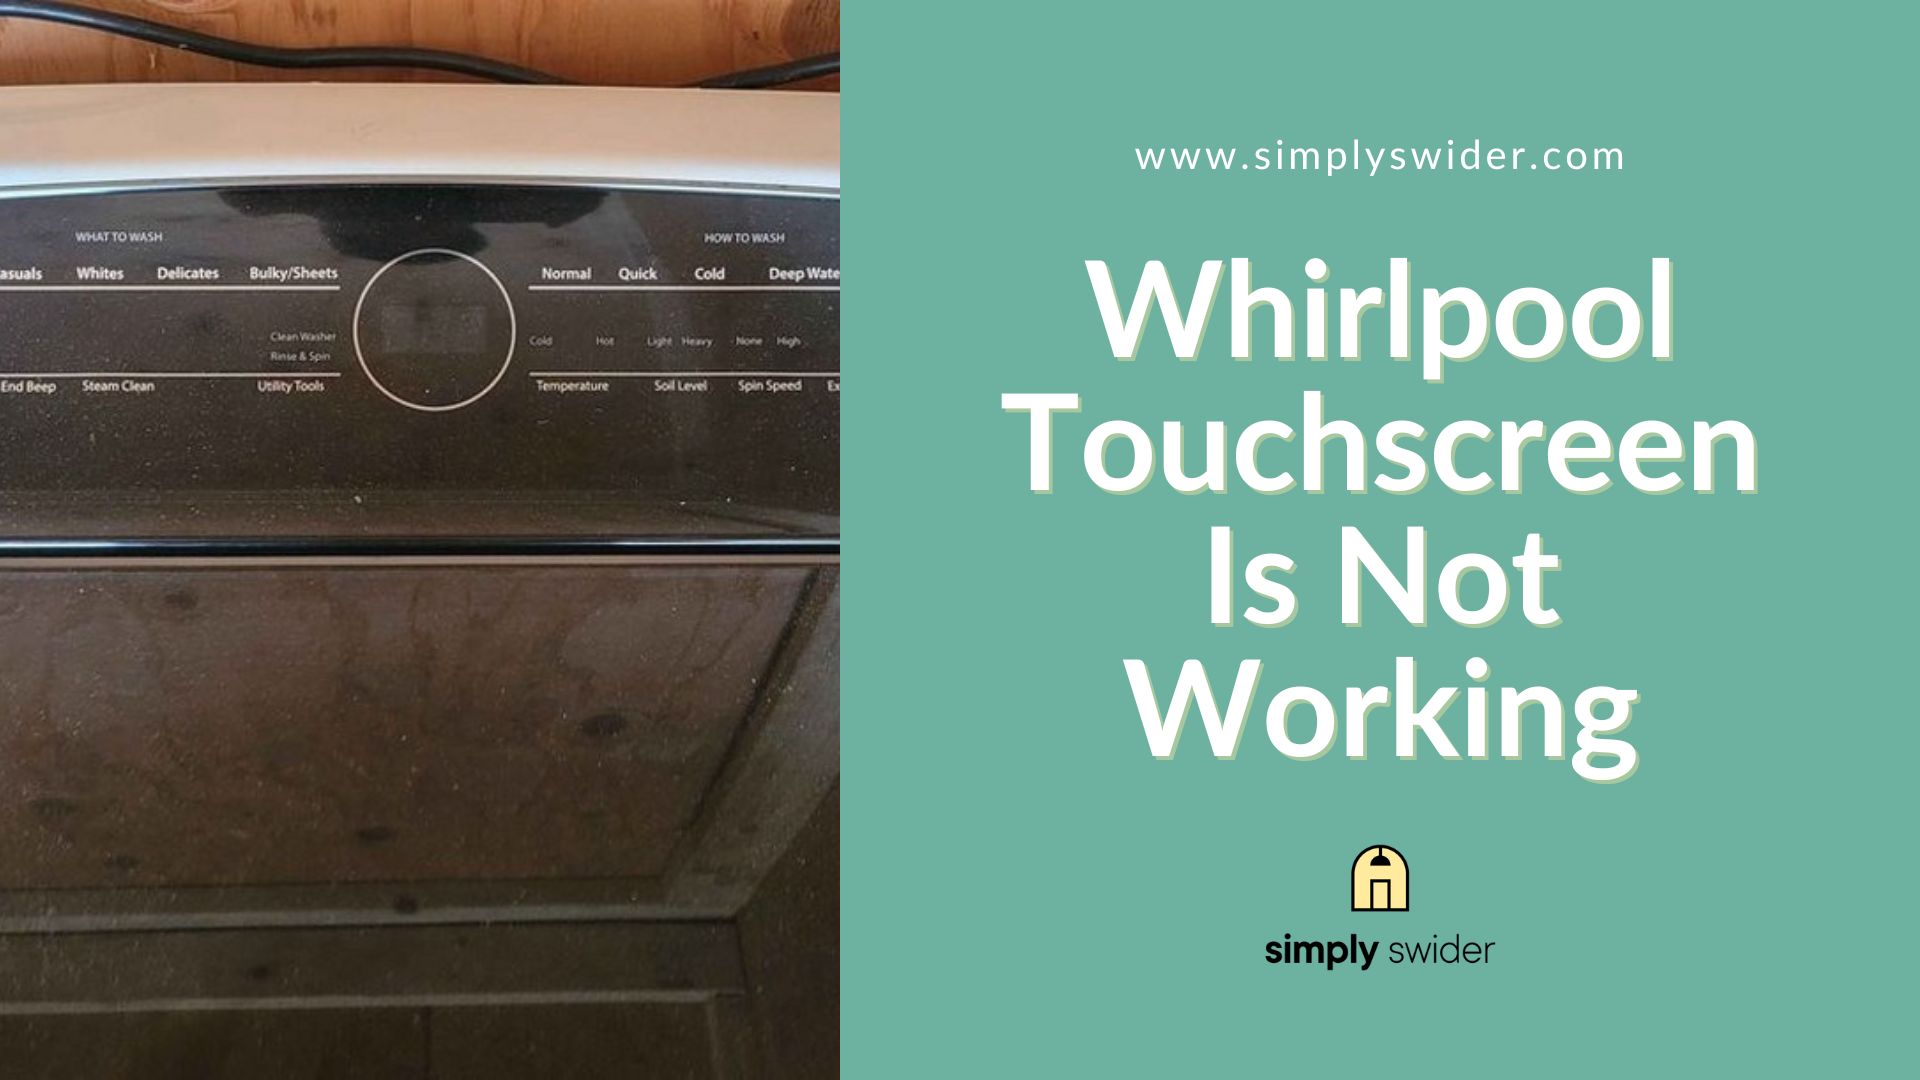 Whirlpool Touchscreen Is Not Working